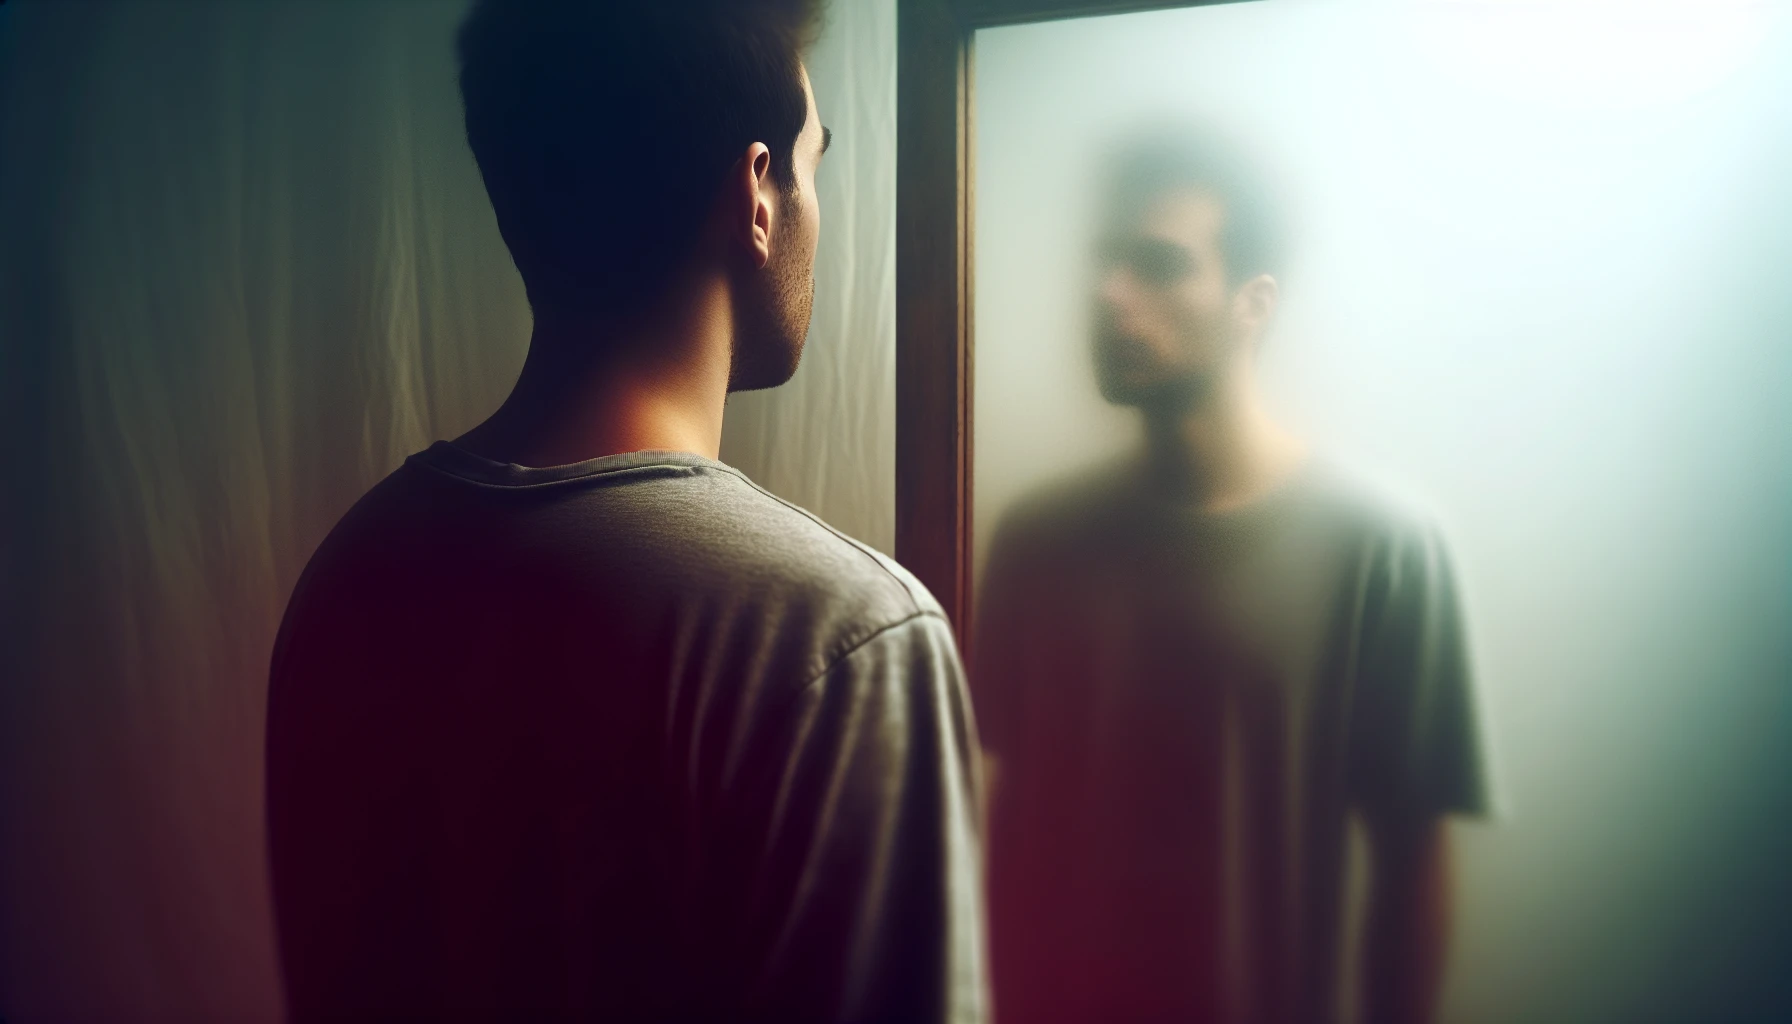 A person looking in the mirror with a puzzled expression, representing difficulty recognizing one's true identity in dissociative fugue